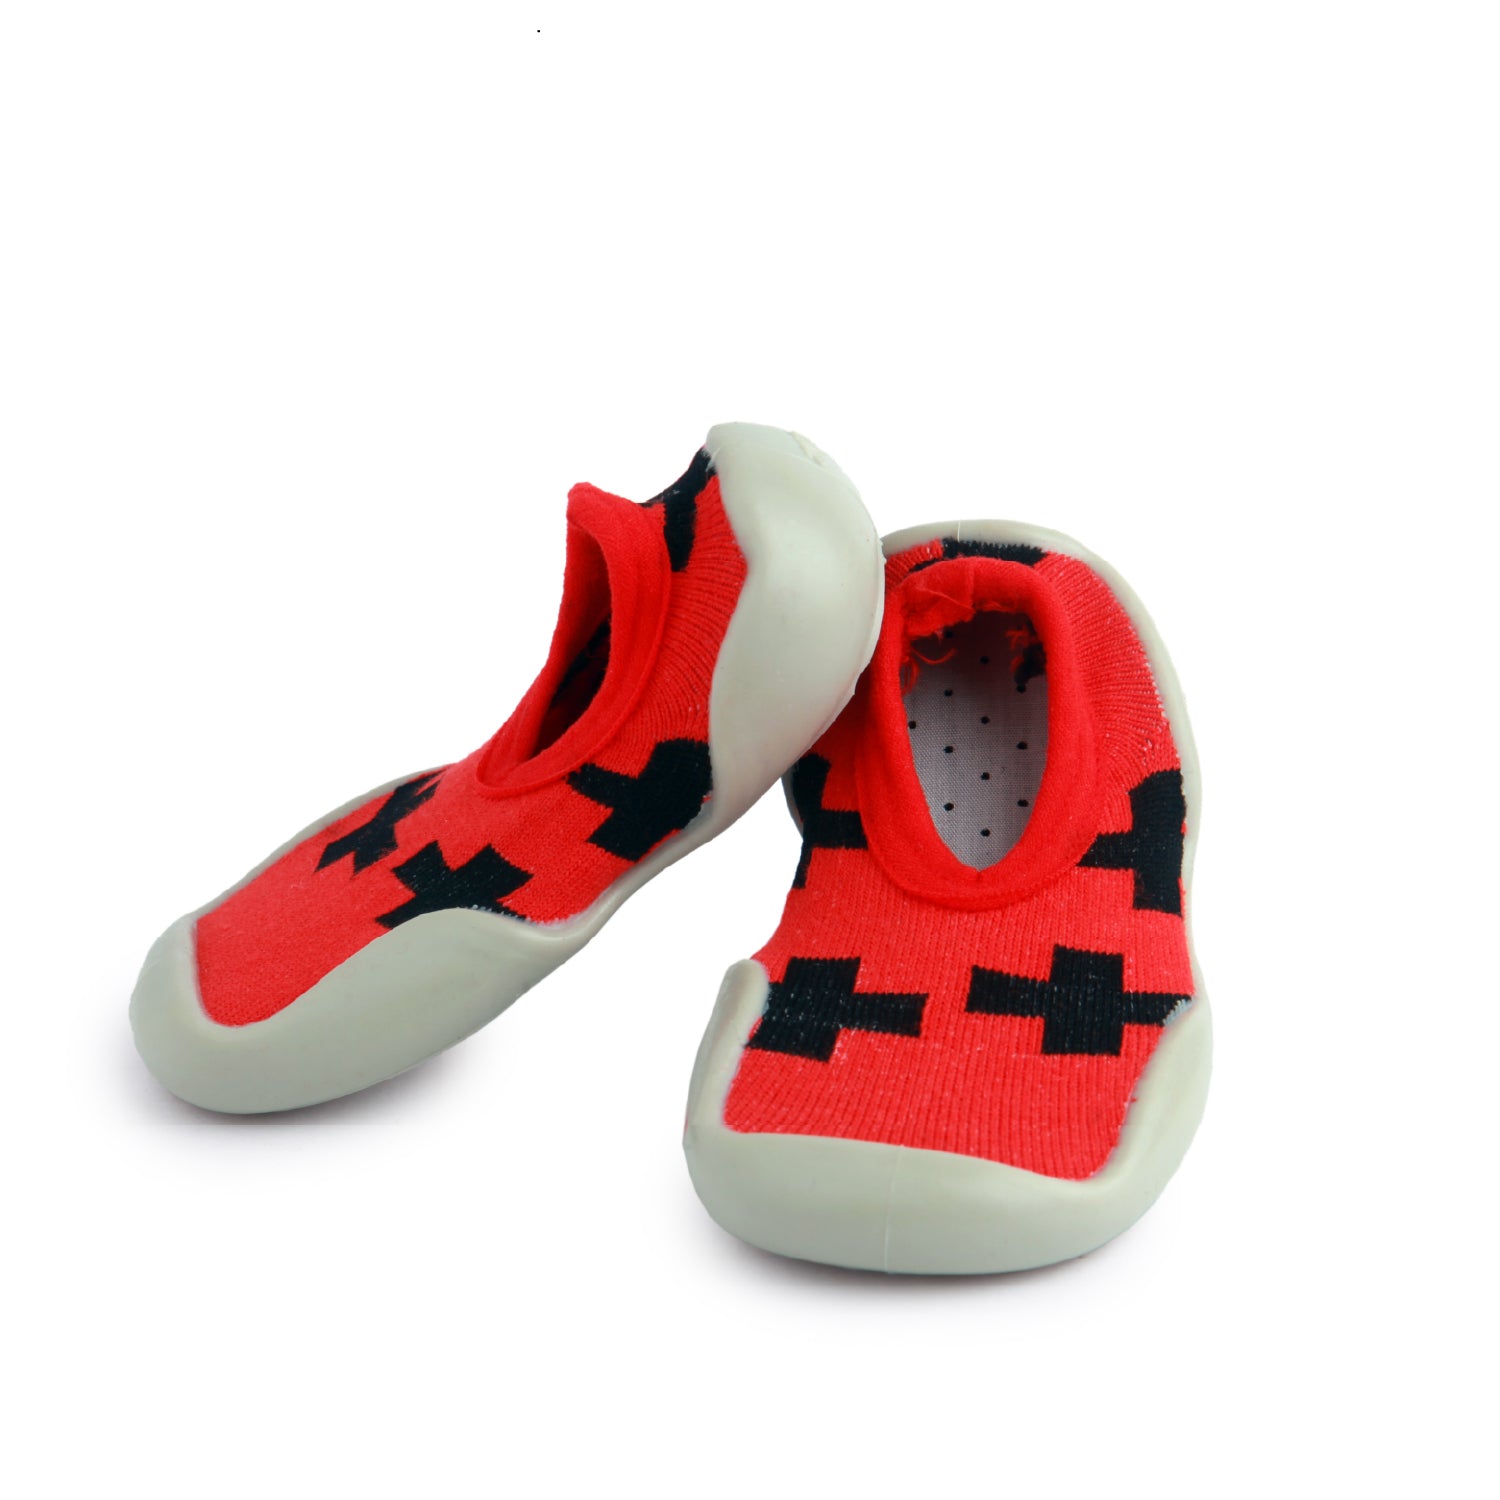 Hot Cross Buns Red Slip-On Shoes - Baby Moo